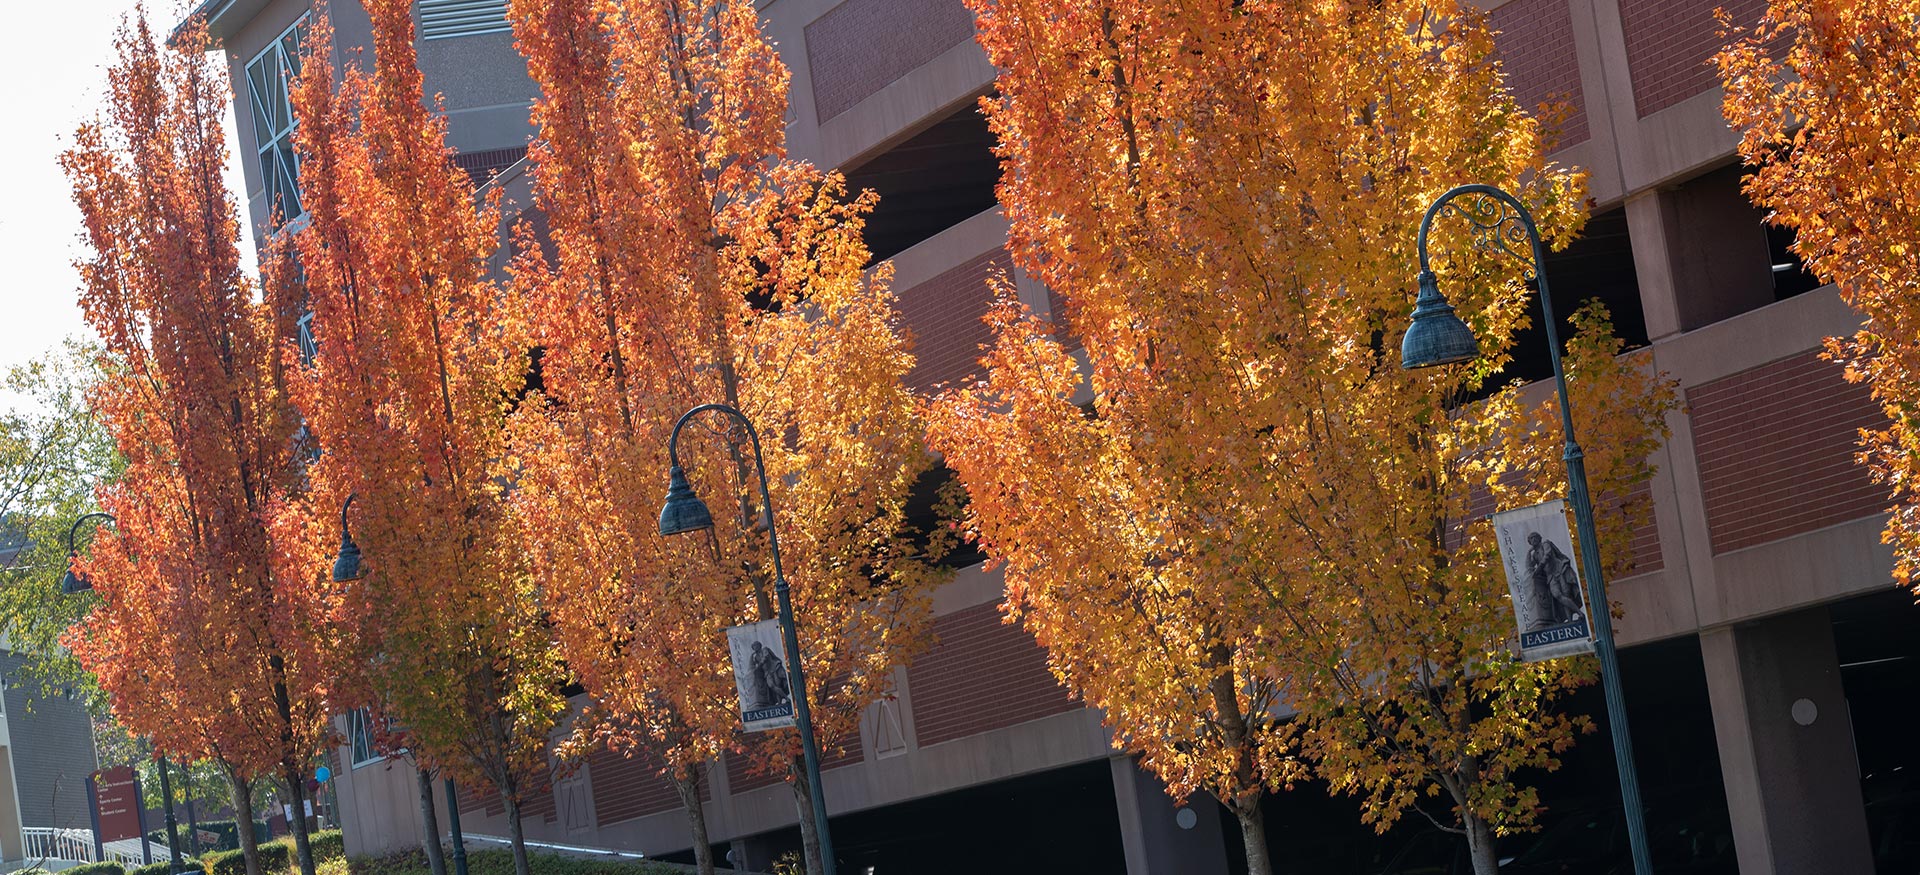 Autumn foliage in front of the Shakespeare parking lot